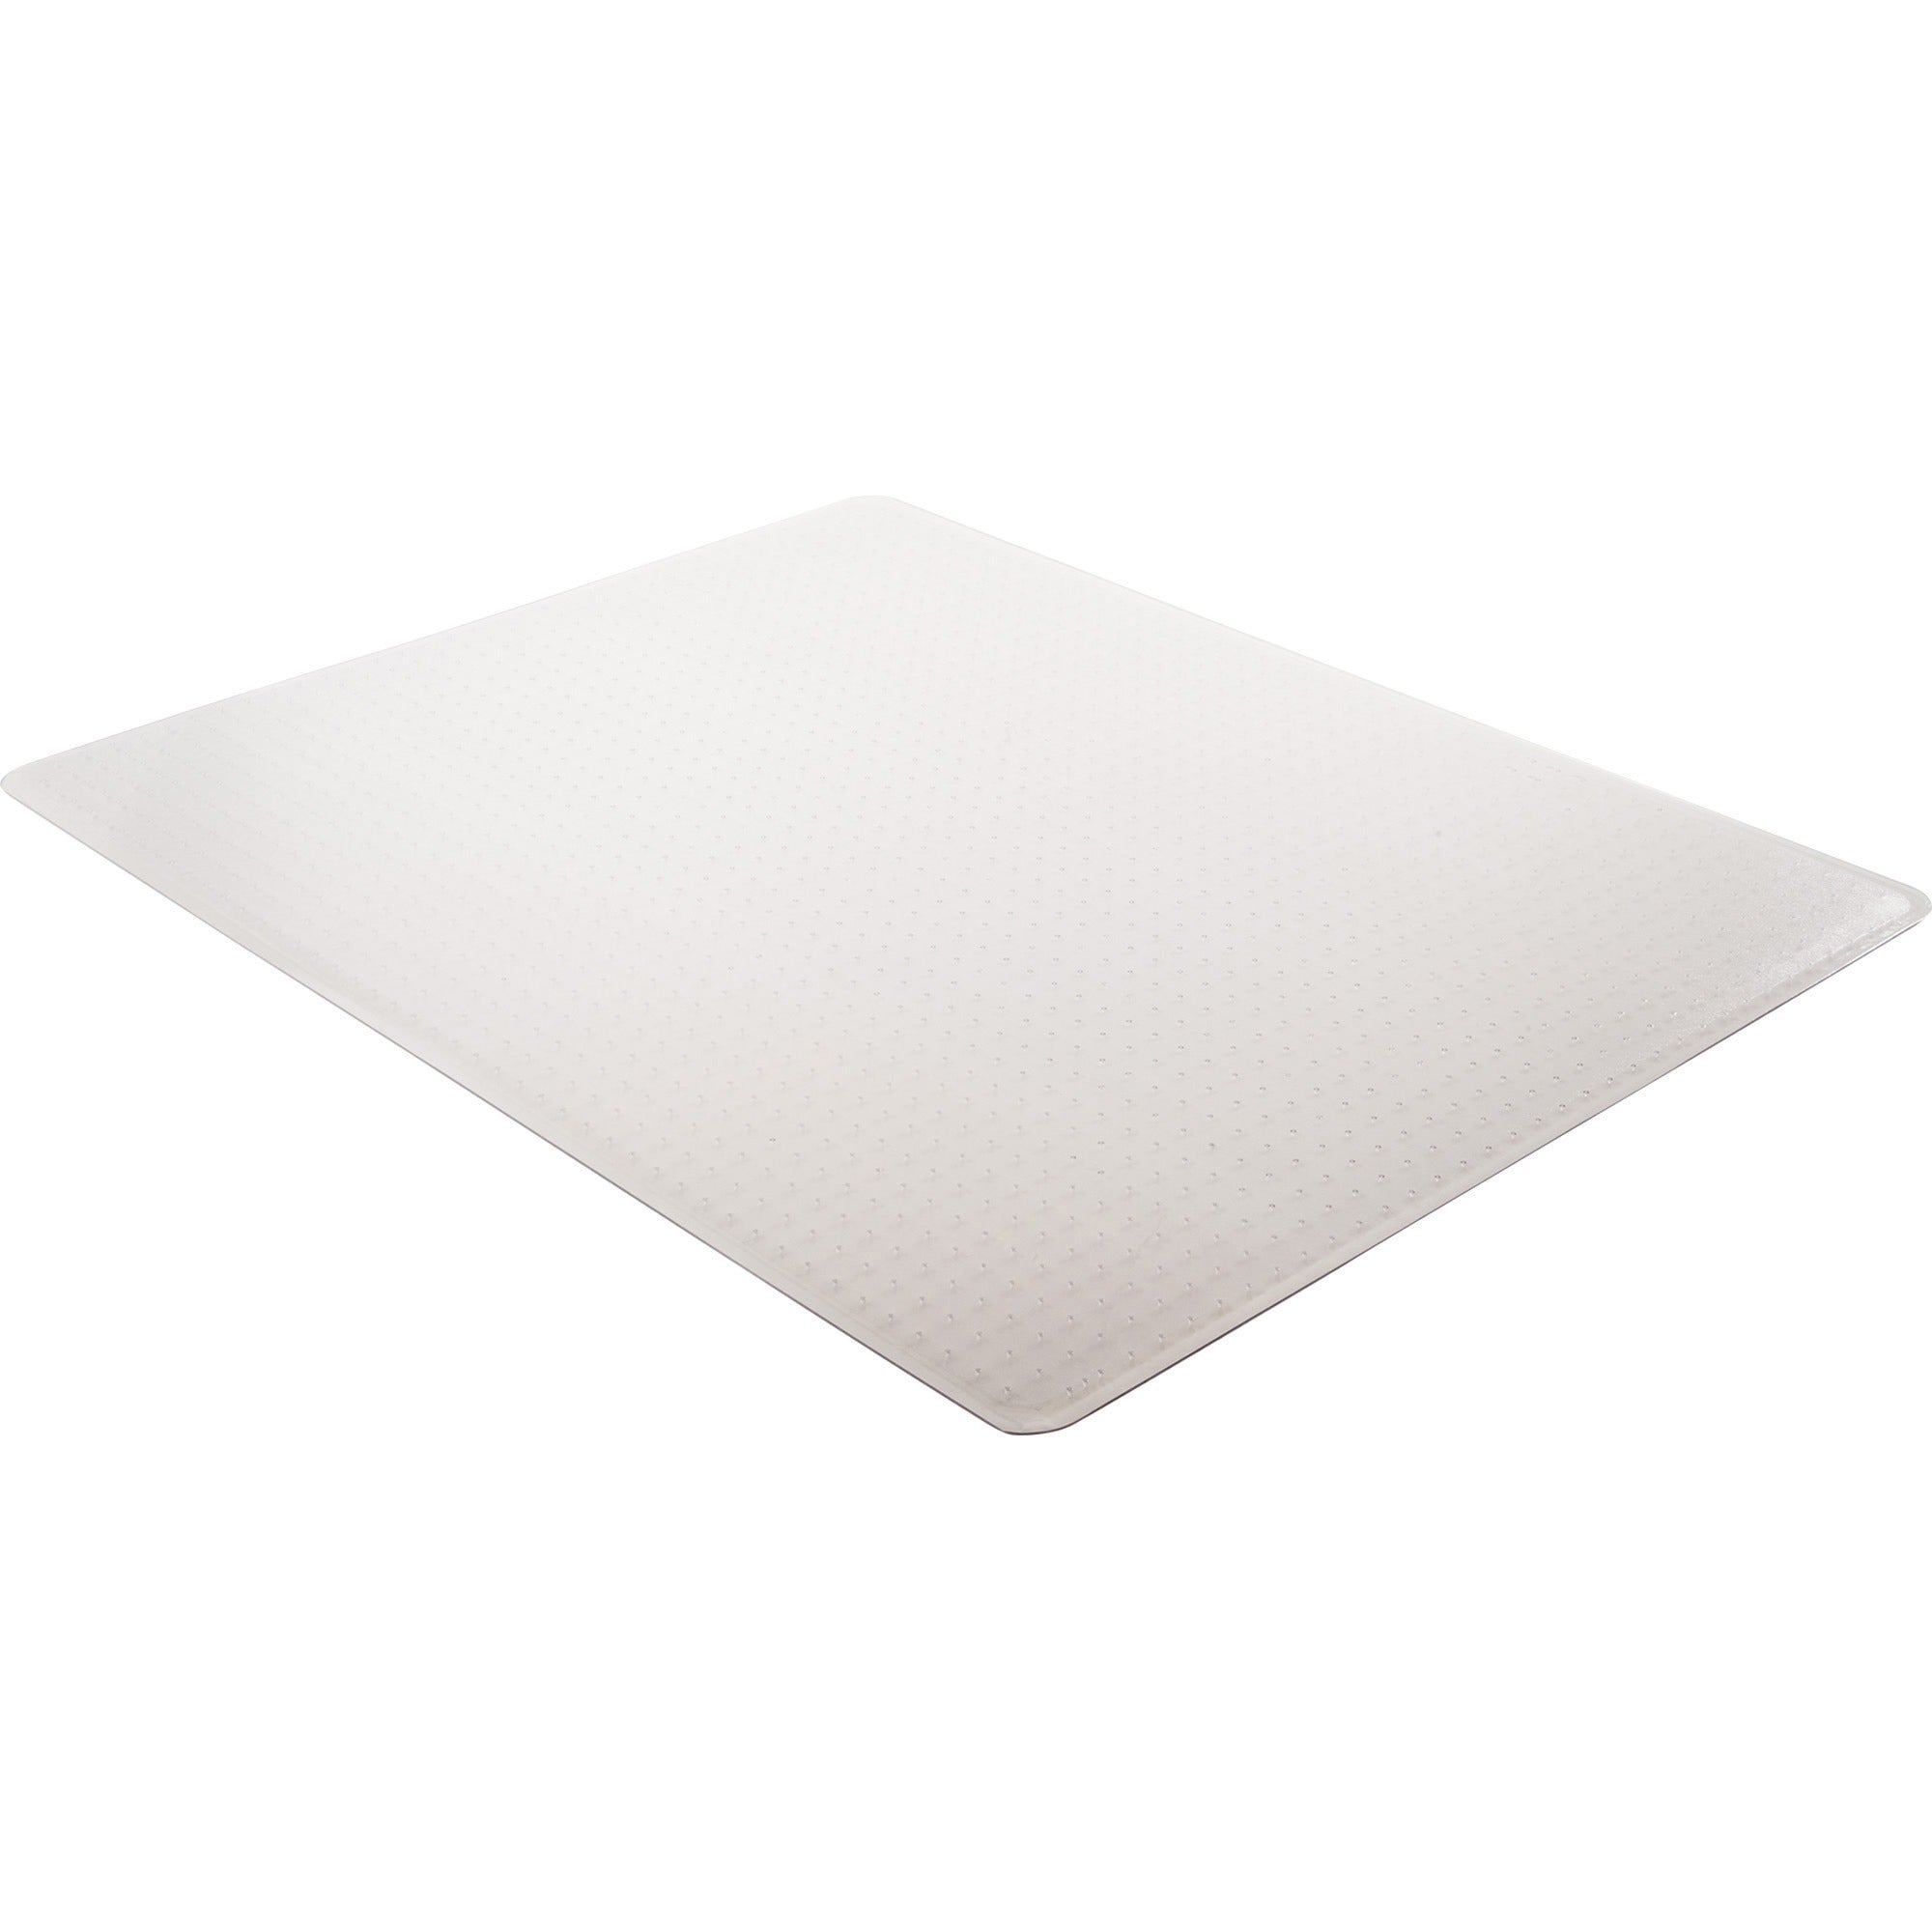 Lorell Low-pile Chairmat - Carpeted Floor - 60" Length x 46" Width x 0.112" Thickness - Rectangular - Vinyl - Clear - 1Each - 